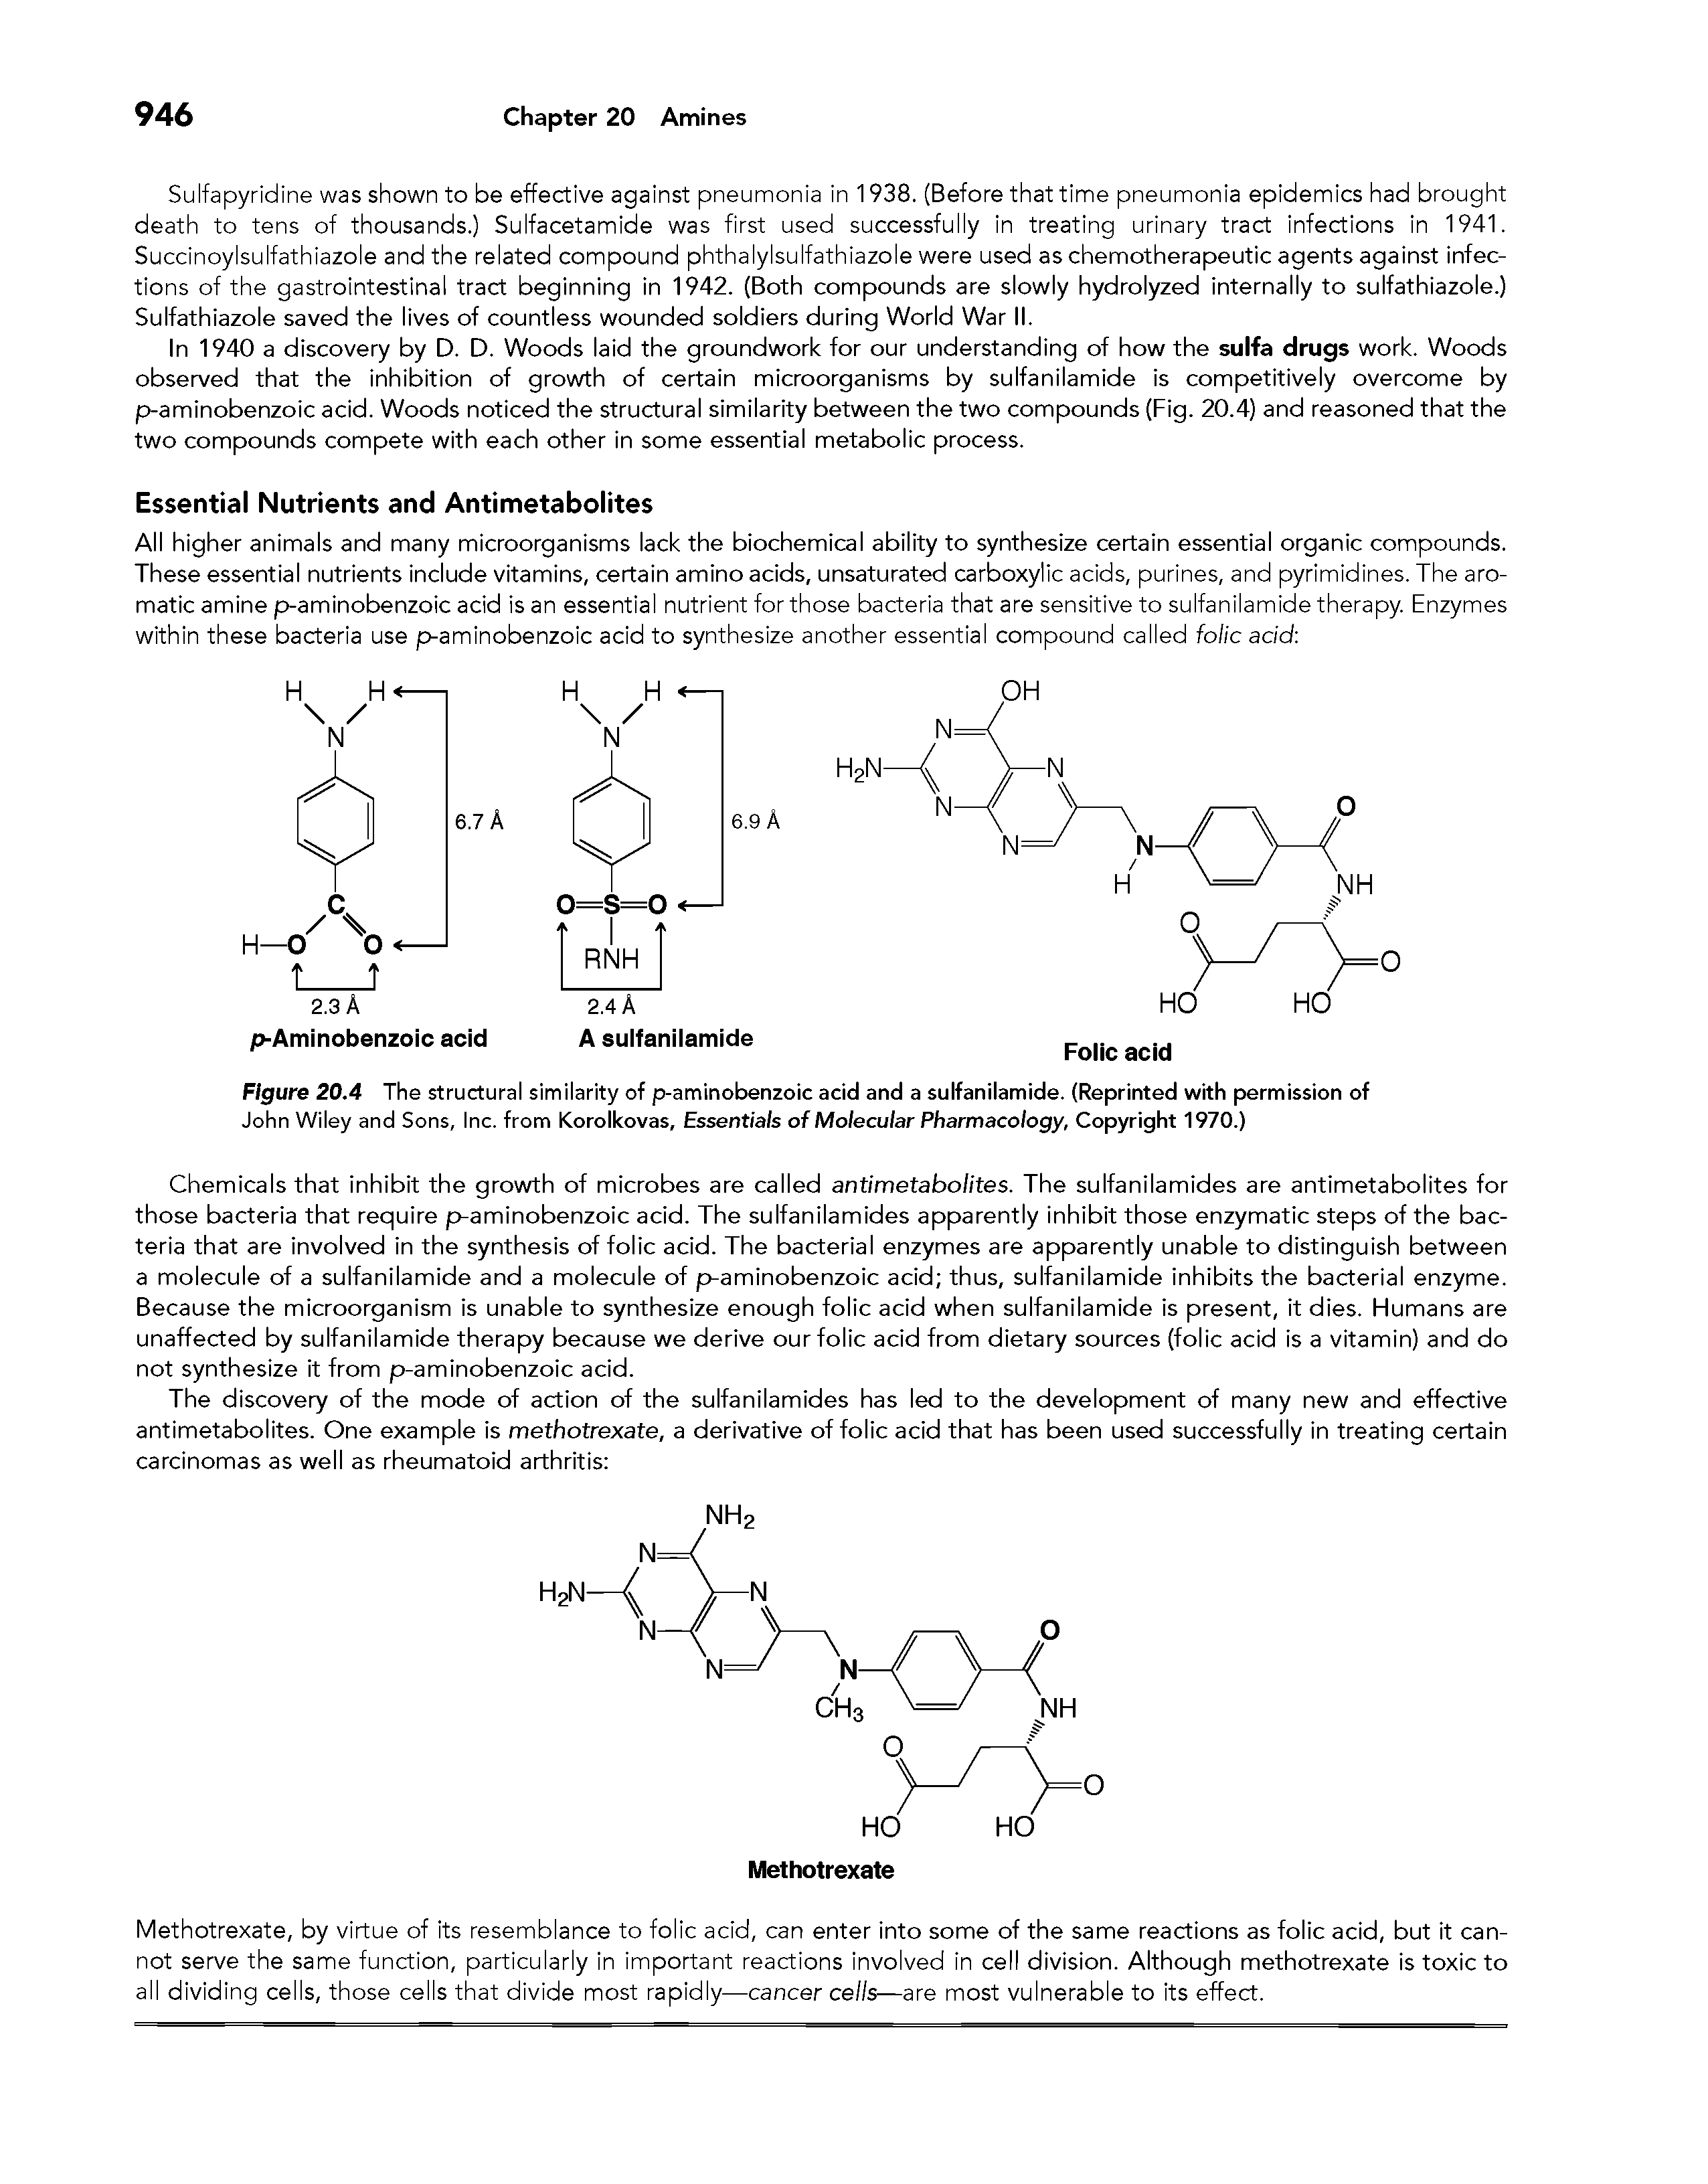 Figure 20.4 The structural similarity of p-aminobenzoic acid and a sulfanilamide. (Reprinted with permission of John Wiley and Sons, Inc. from Korolkovas, Essentials of Molecular Pharmacology, Copyright 1970.)...